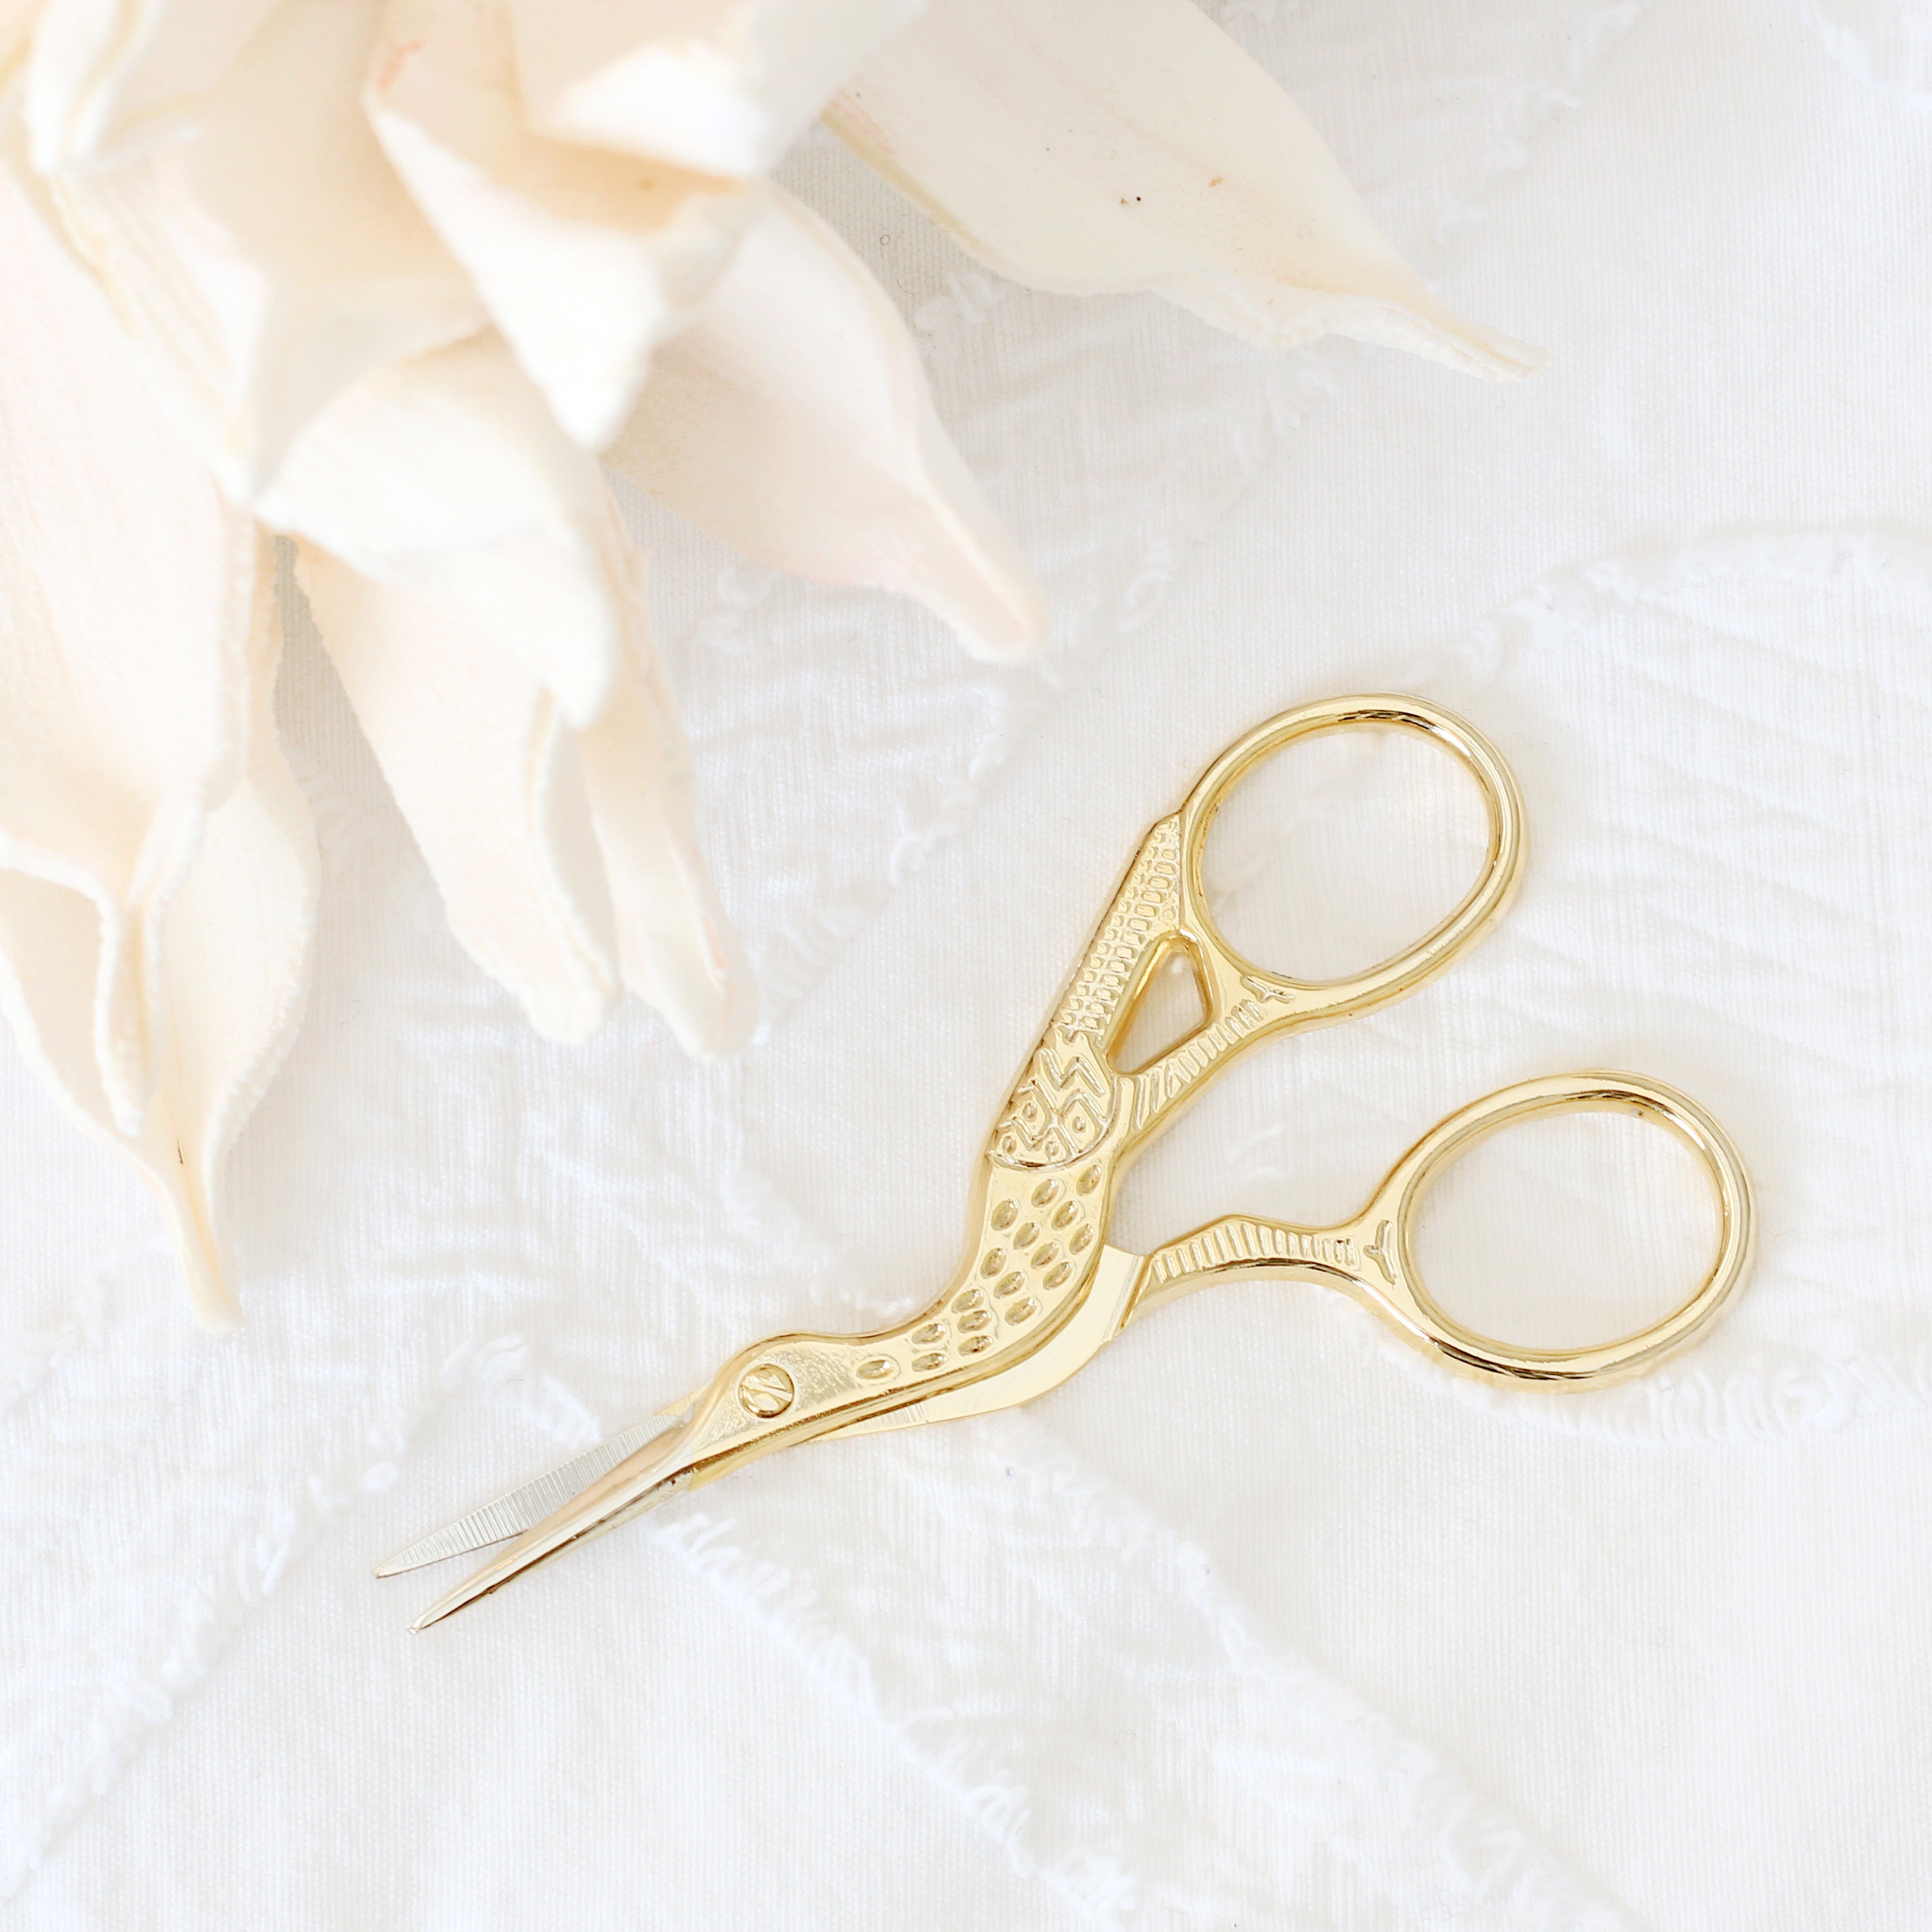 Vintage Crane Bird Embroidery Sewing Scissors Italy 3.75 Gold and Silver  Tone